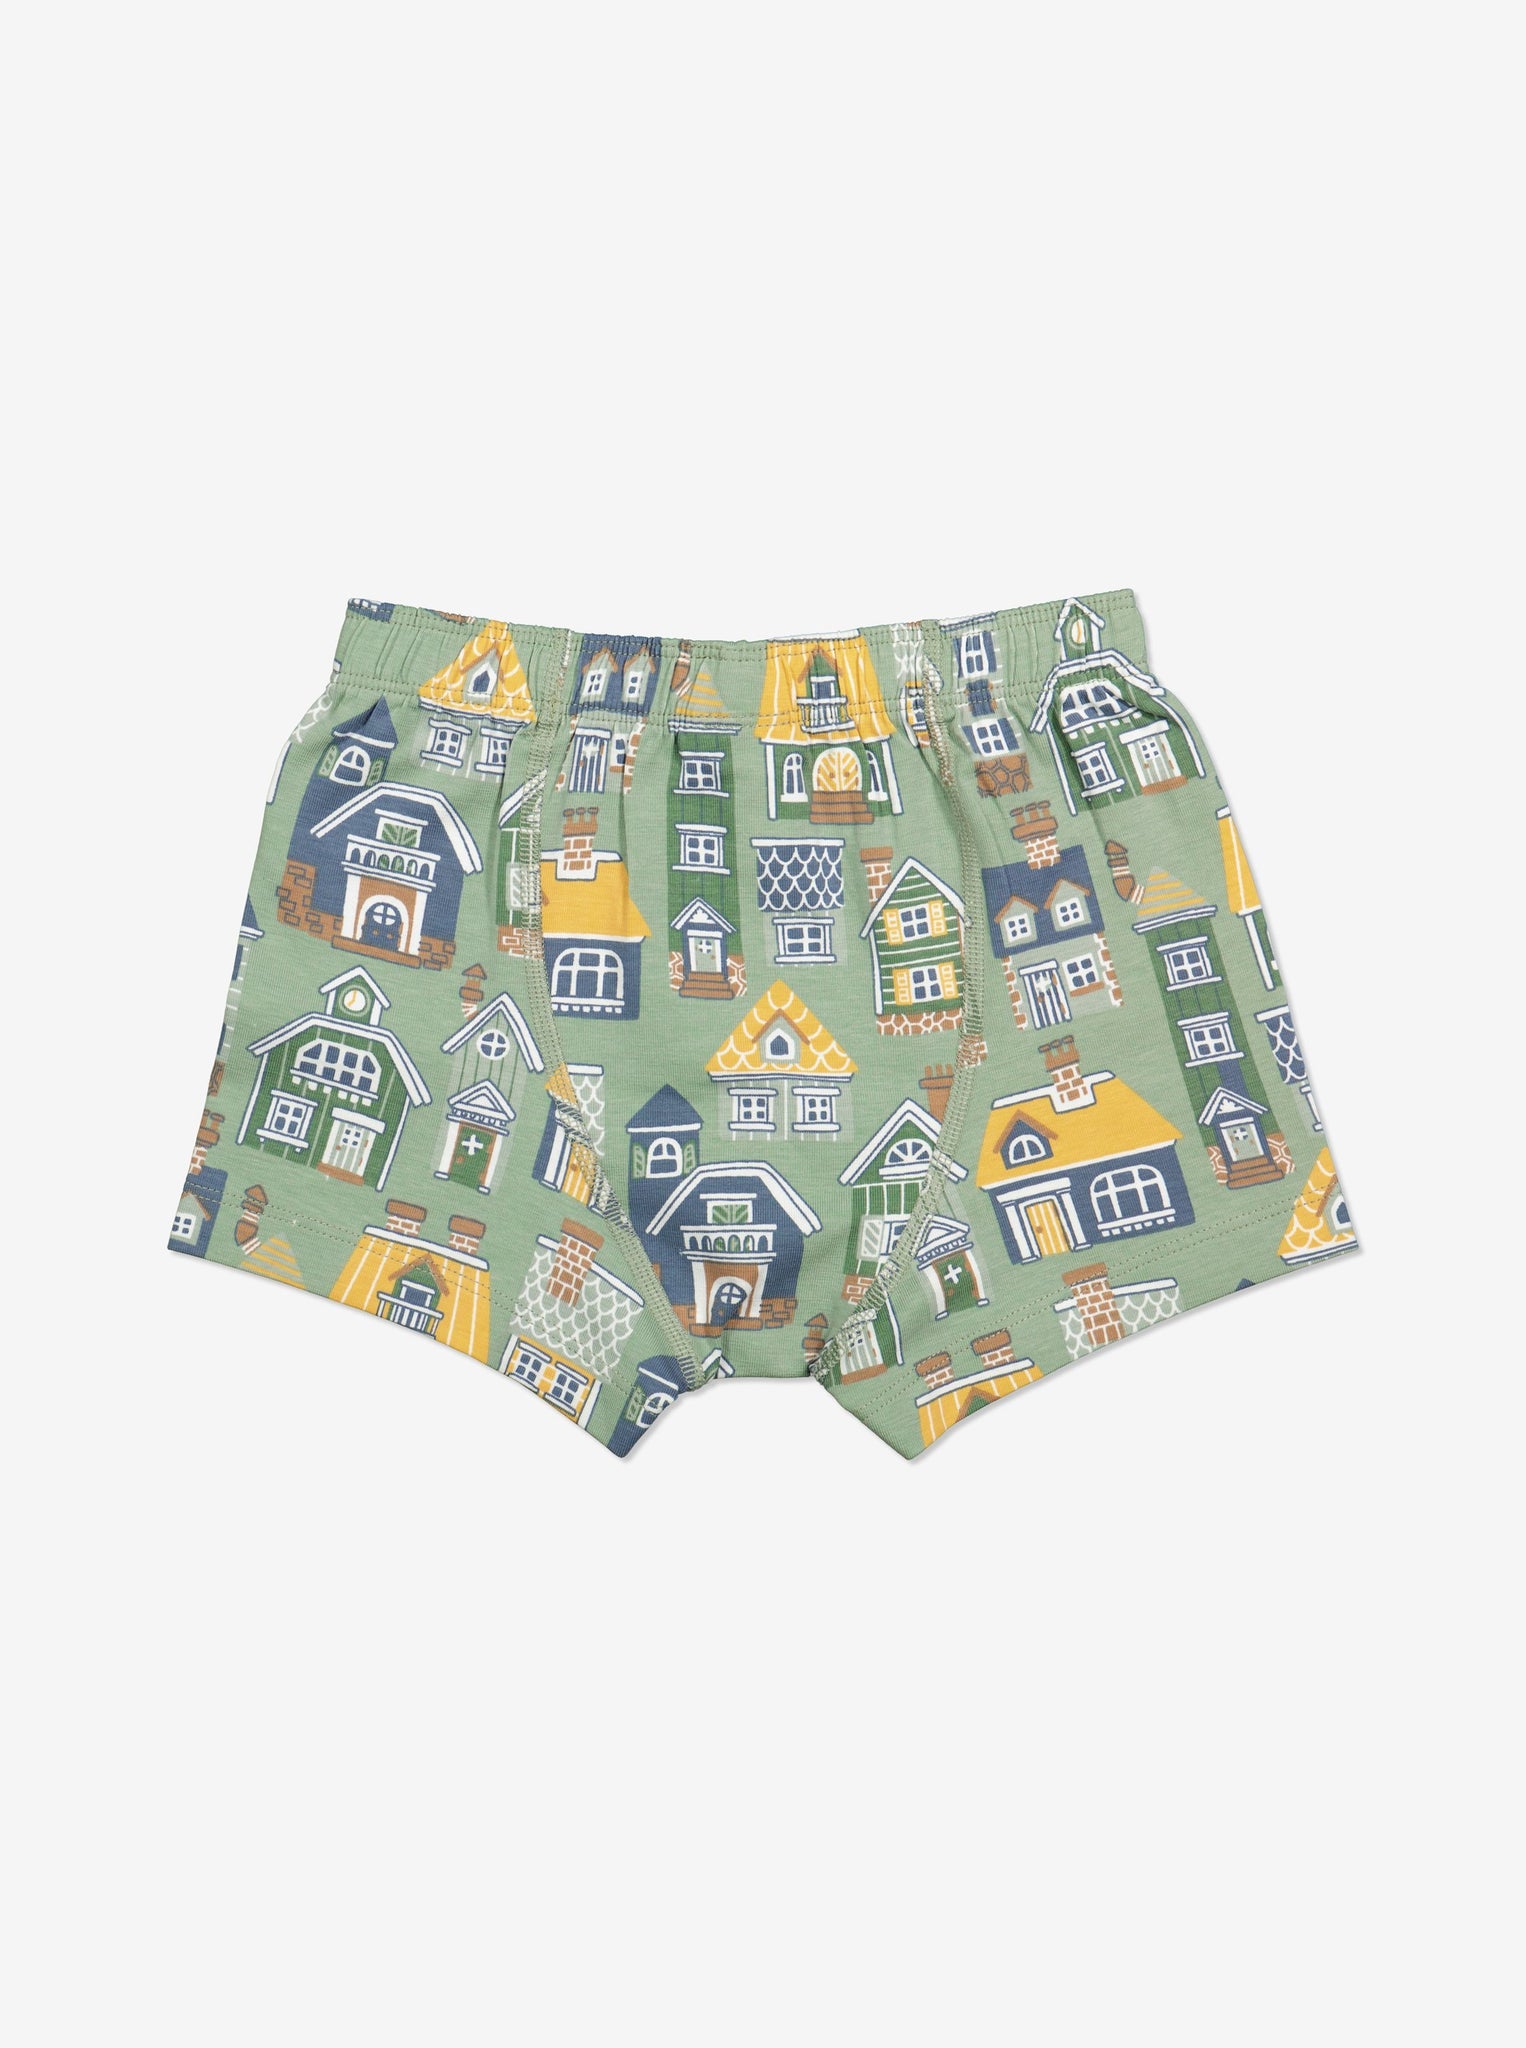  Organic Green Boys Cotton Boxer Shorts from Polarn O. Pyret Kidswear. Made from ethically sourced materials.